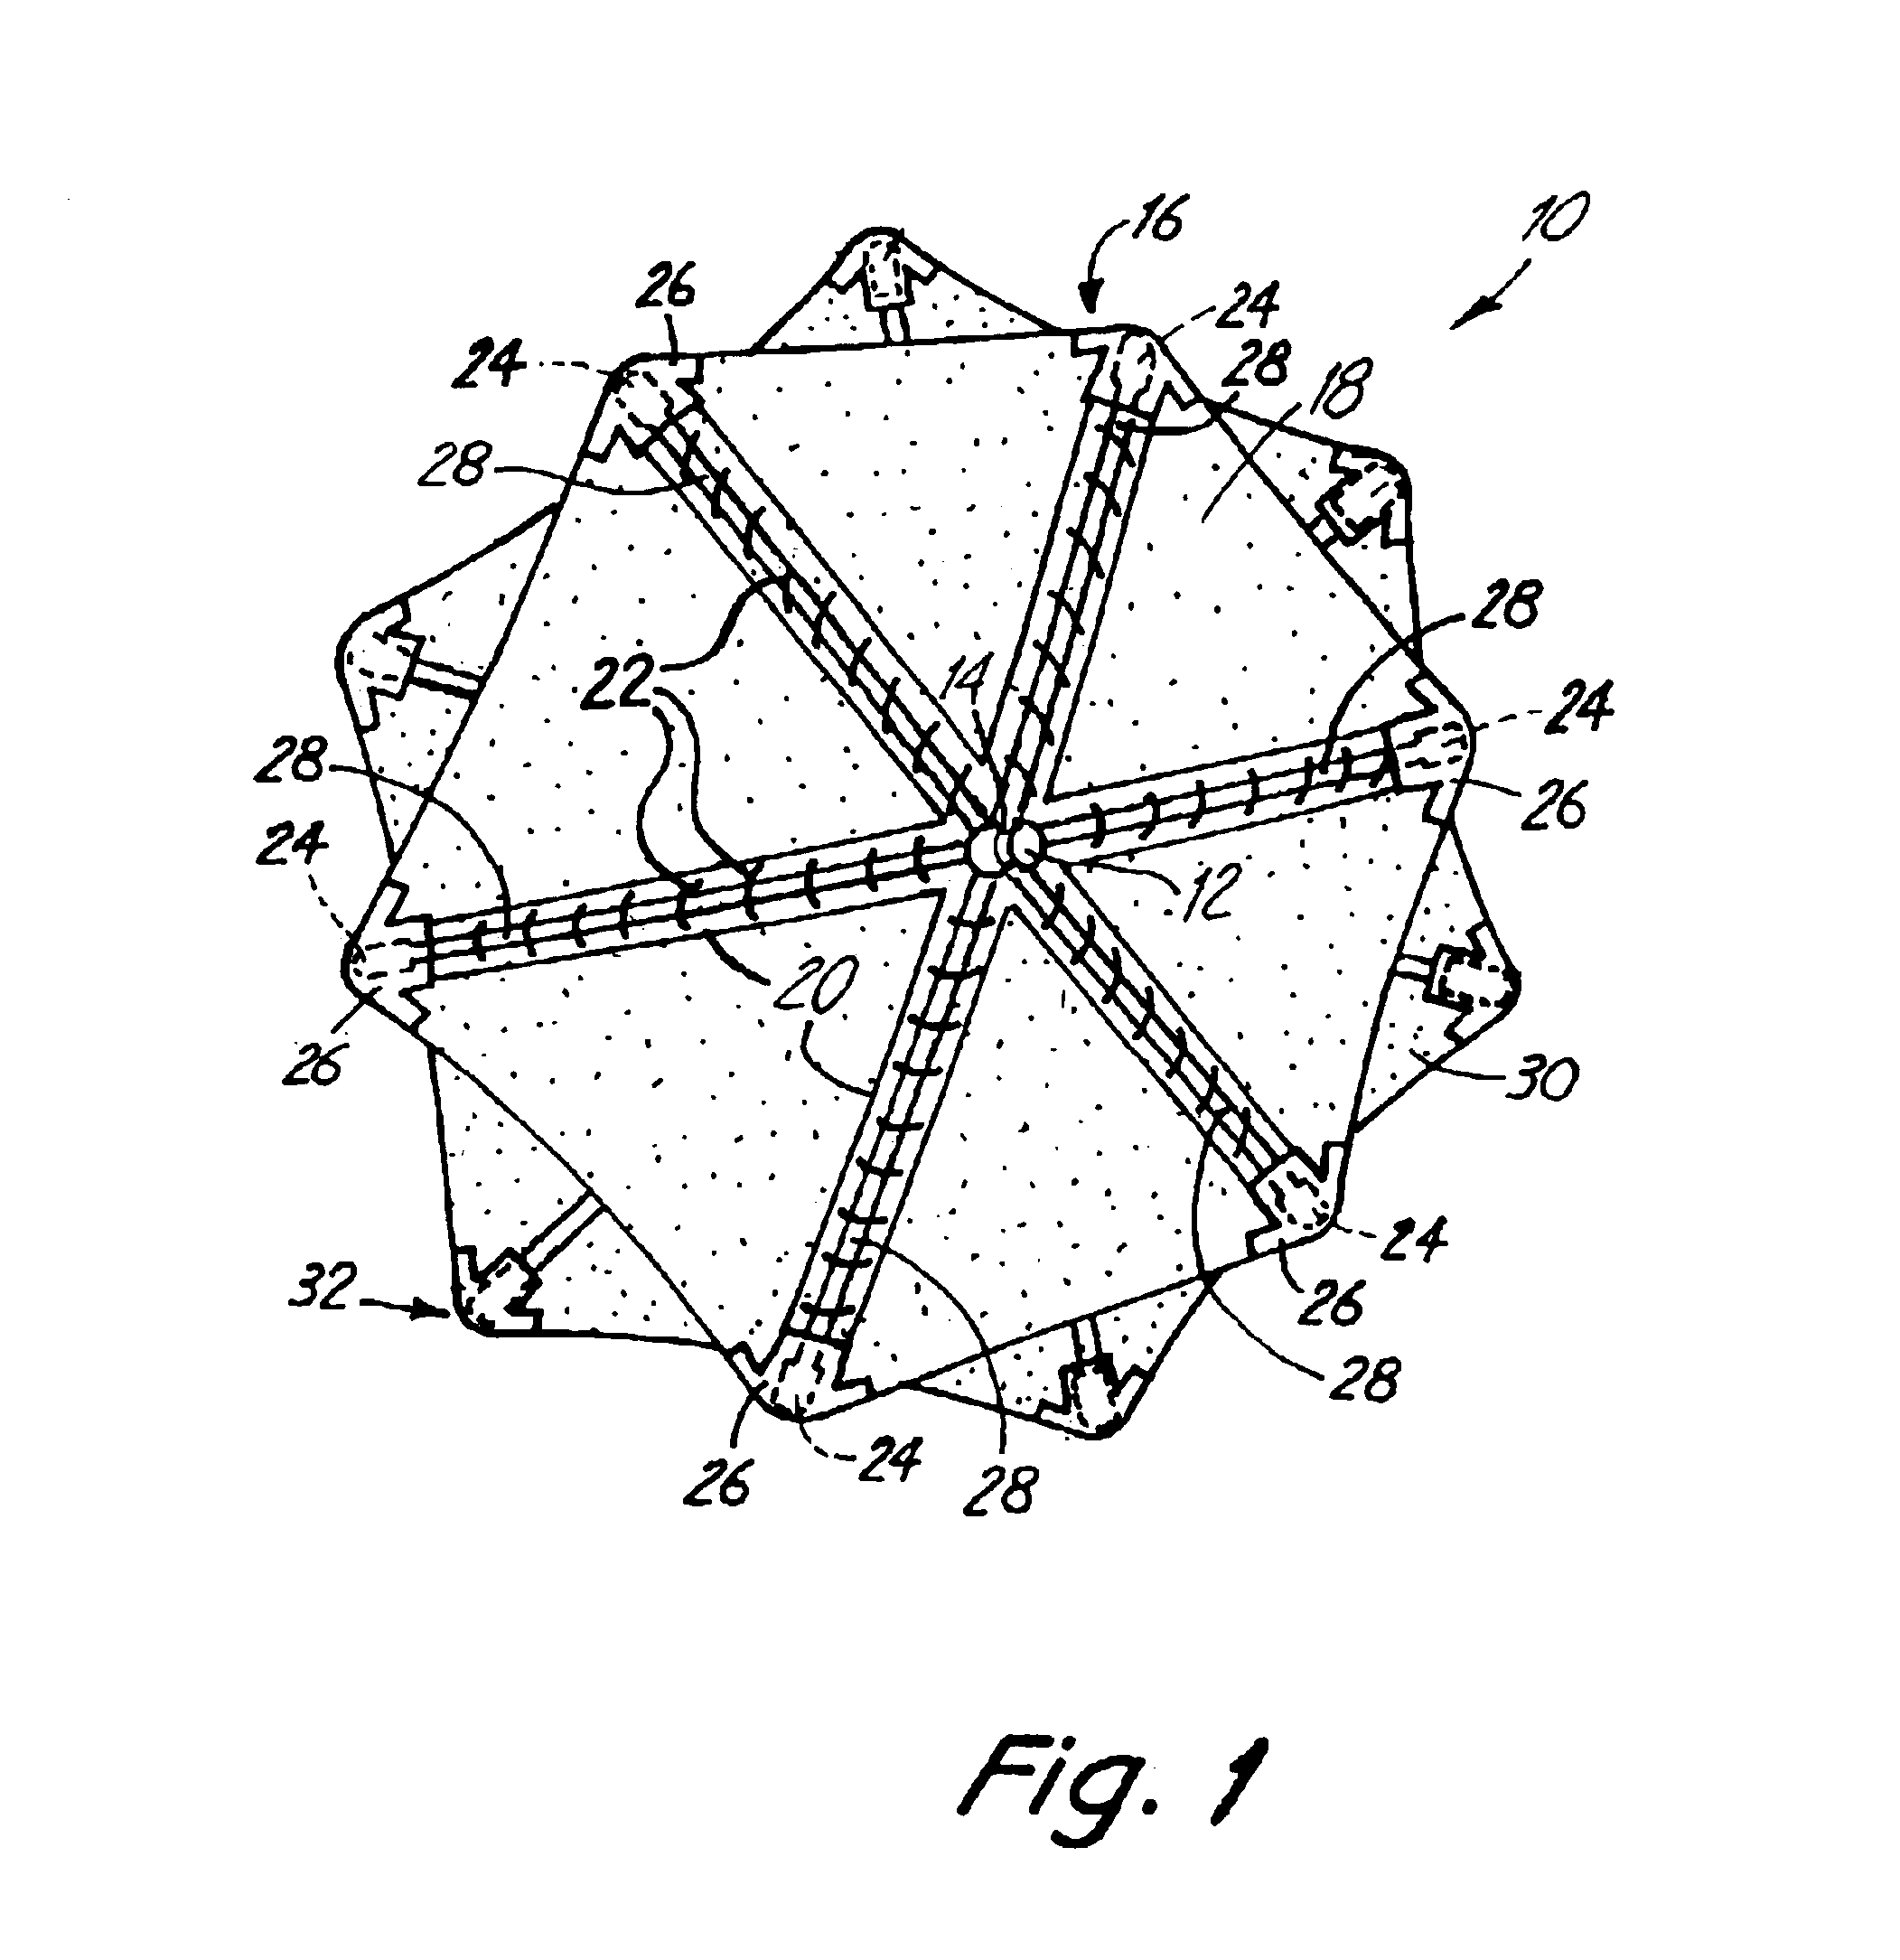 Laminated sheets for use in a fully retrievable occlusion device